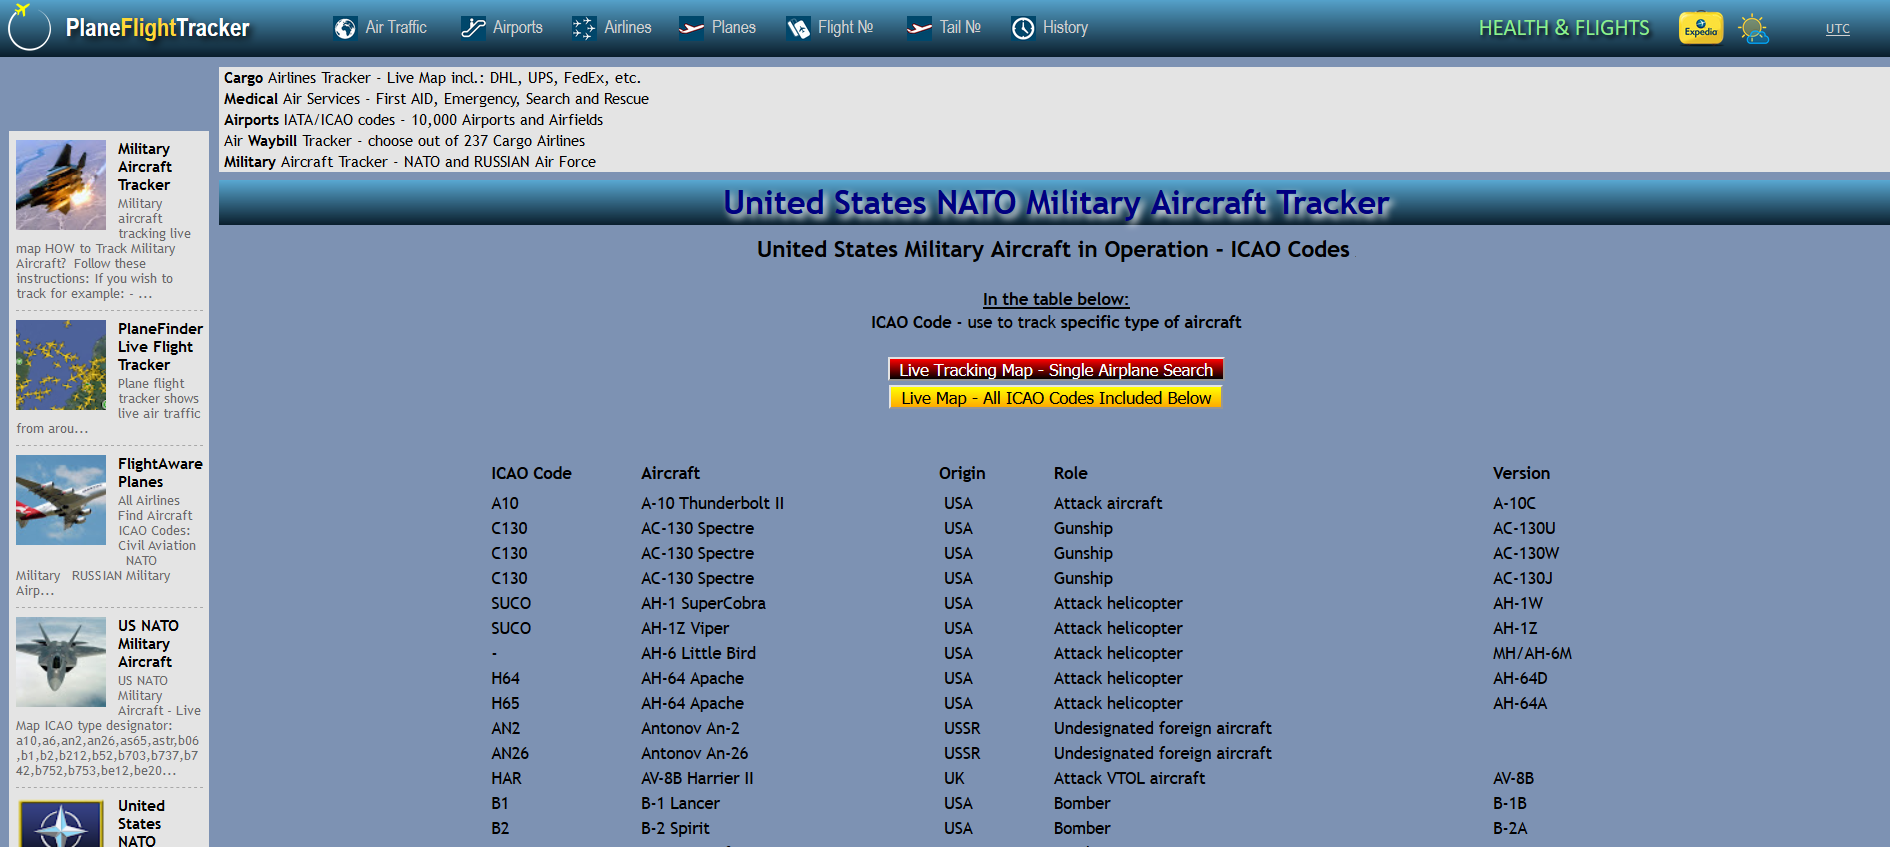 Screenshot of United States NATO Military Aircraft Tracker and which aircraft are in operation.